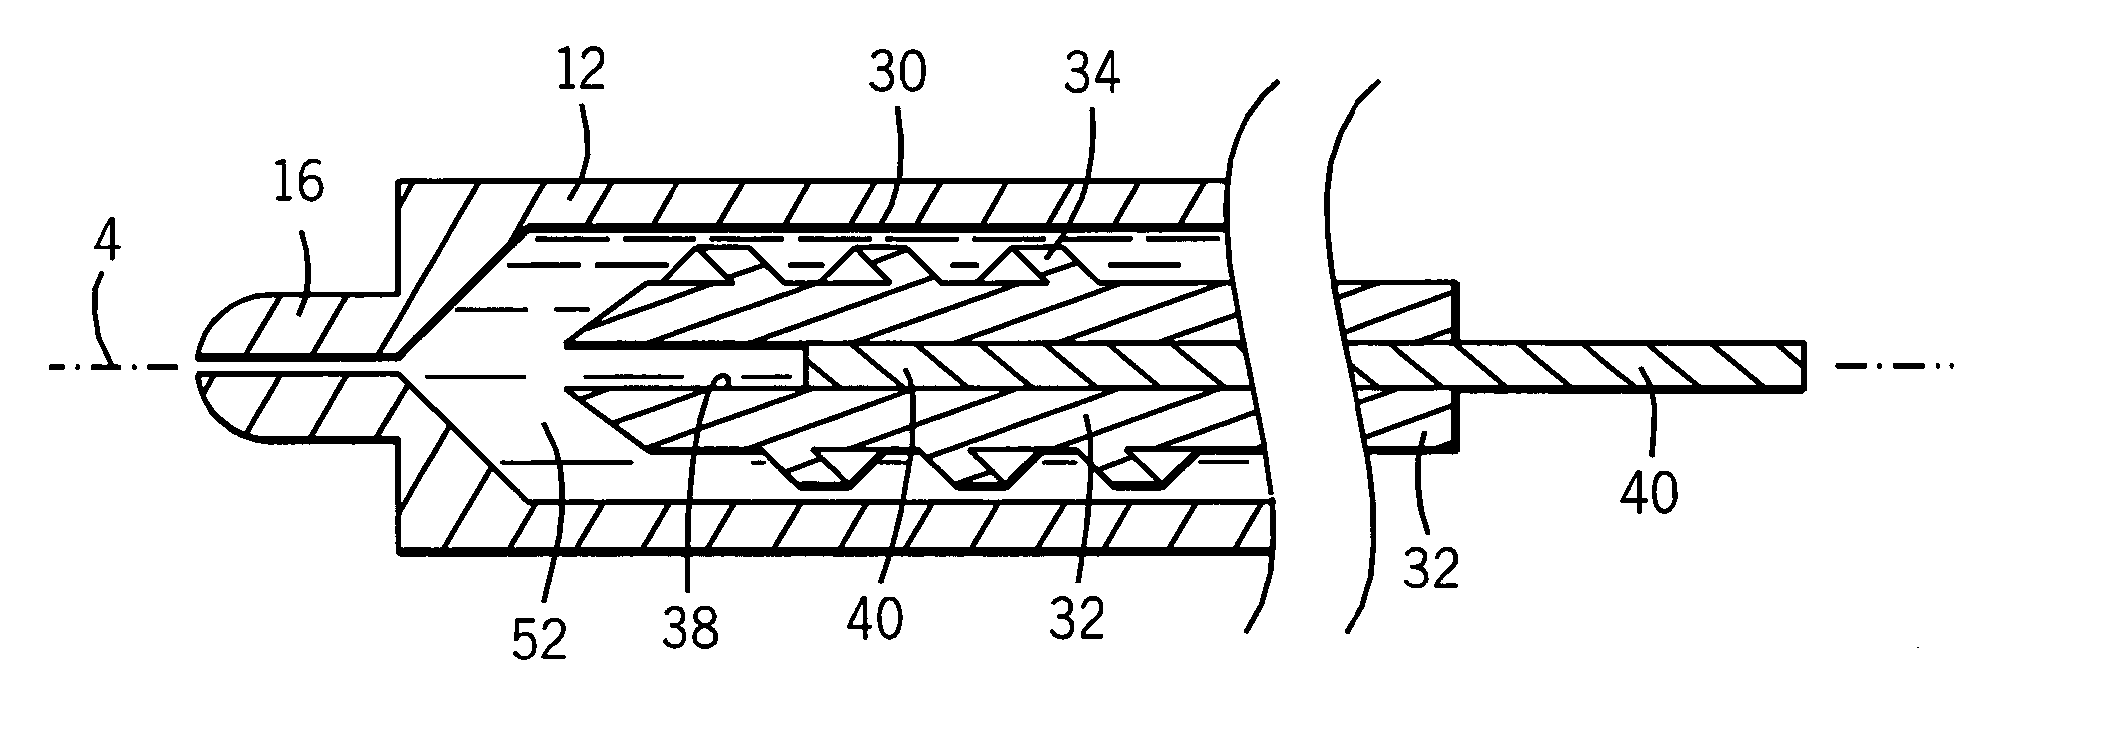 Coaxial injector screw providing improved small shot metering